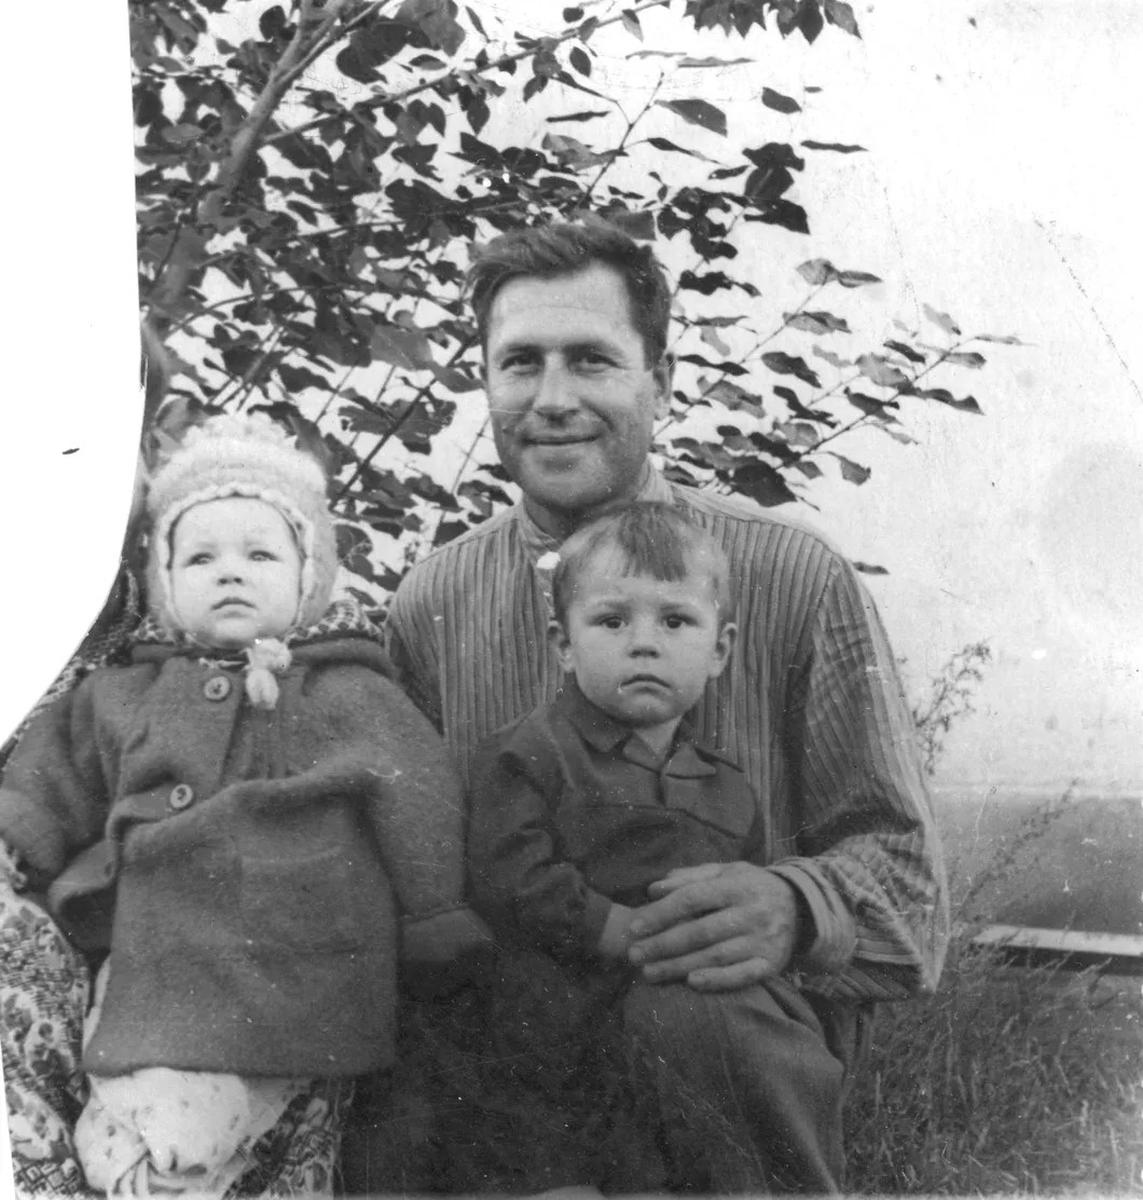 My grandfather with his kids after the war. My mom is on the left